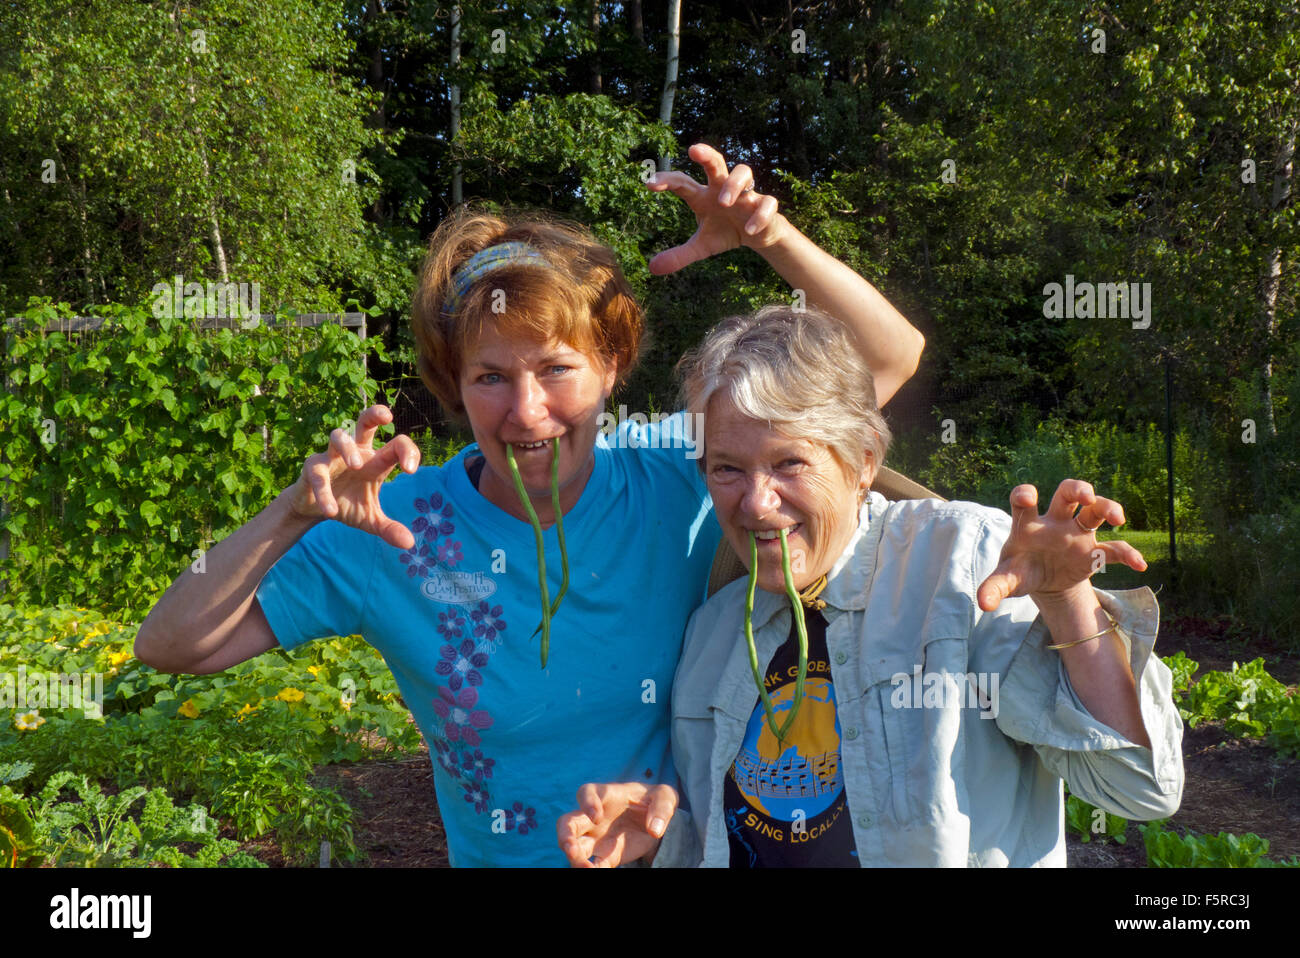 Two women demonstrate the funny and side of gardening wearing green bean fangs amd joking in friendship, Yarmouth Maine, USA Stock Photo